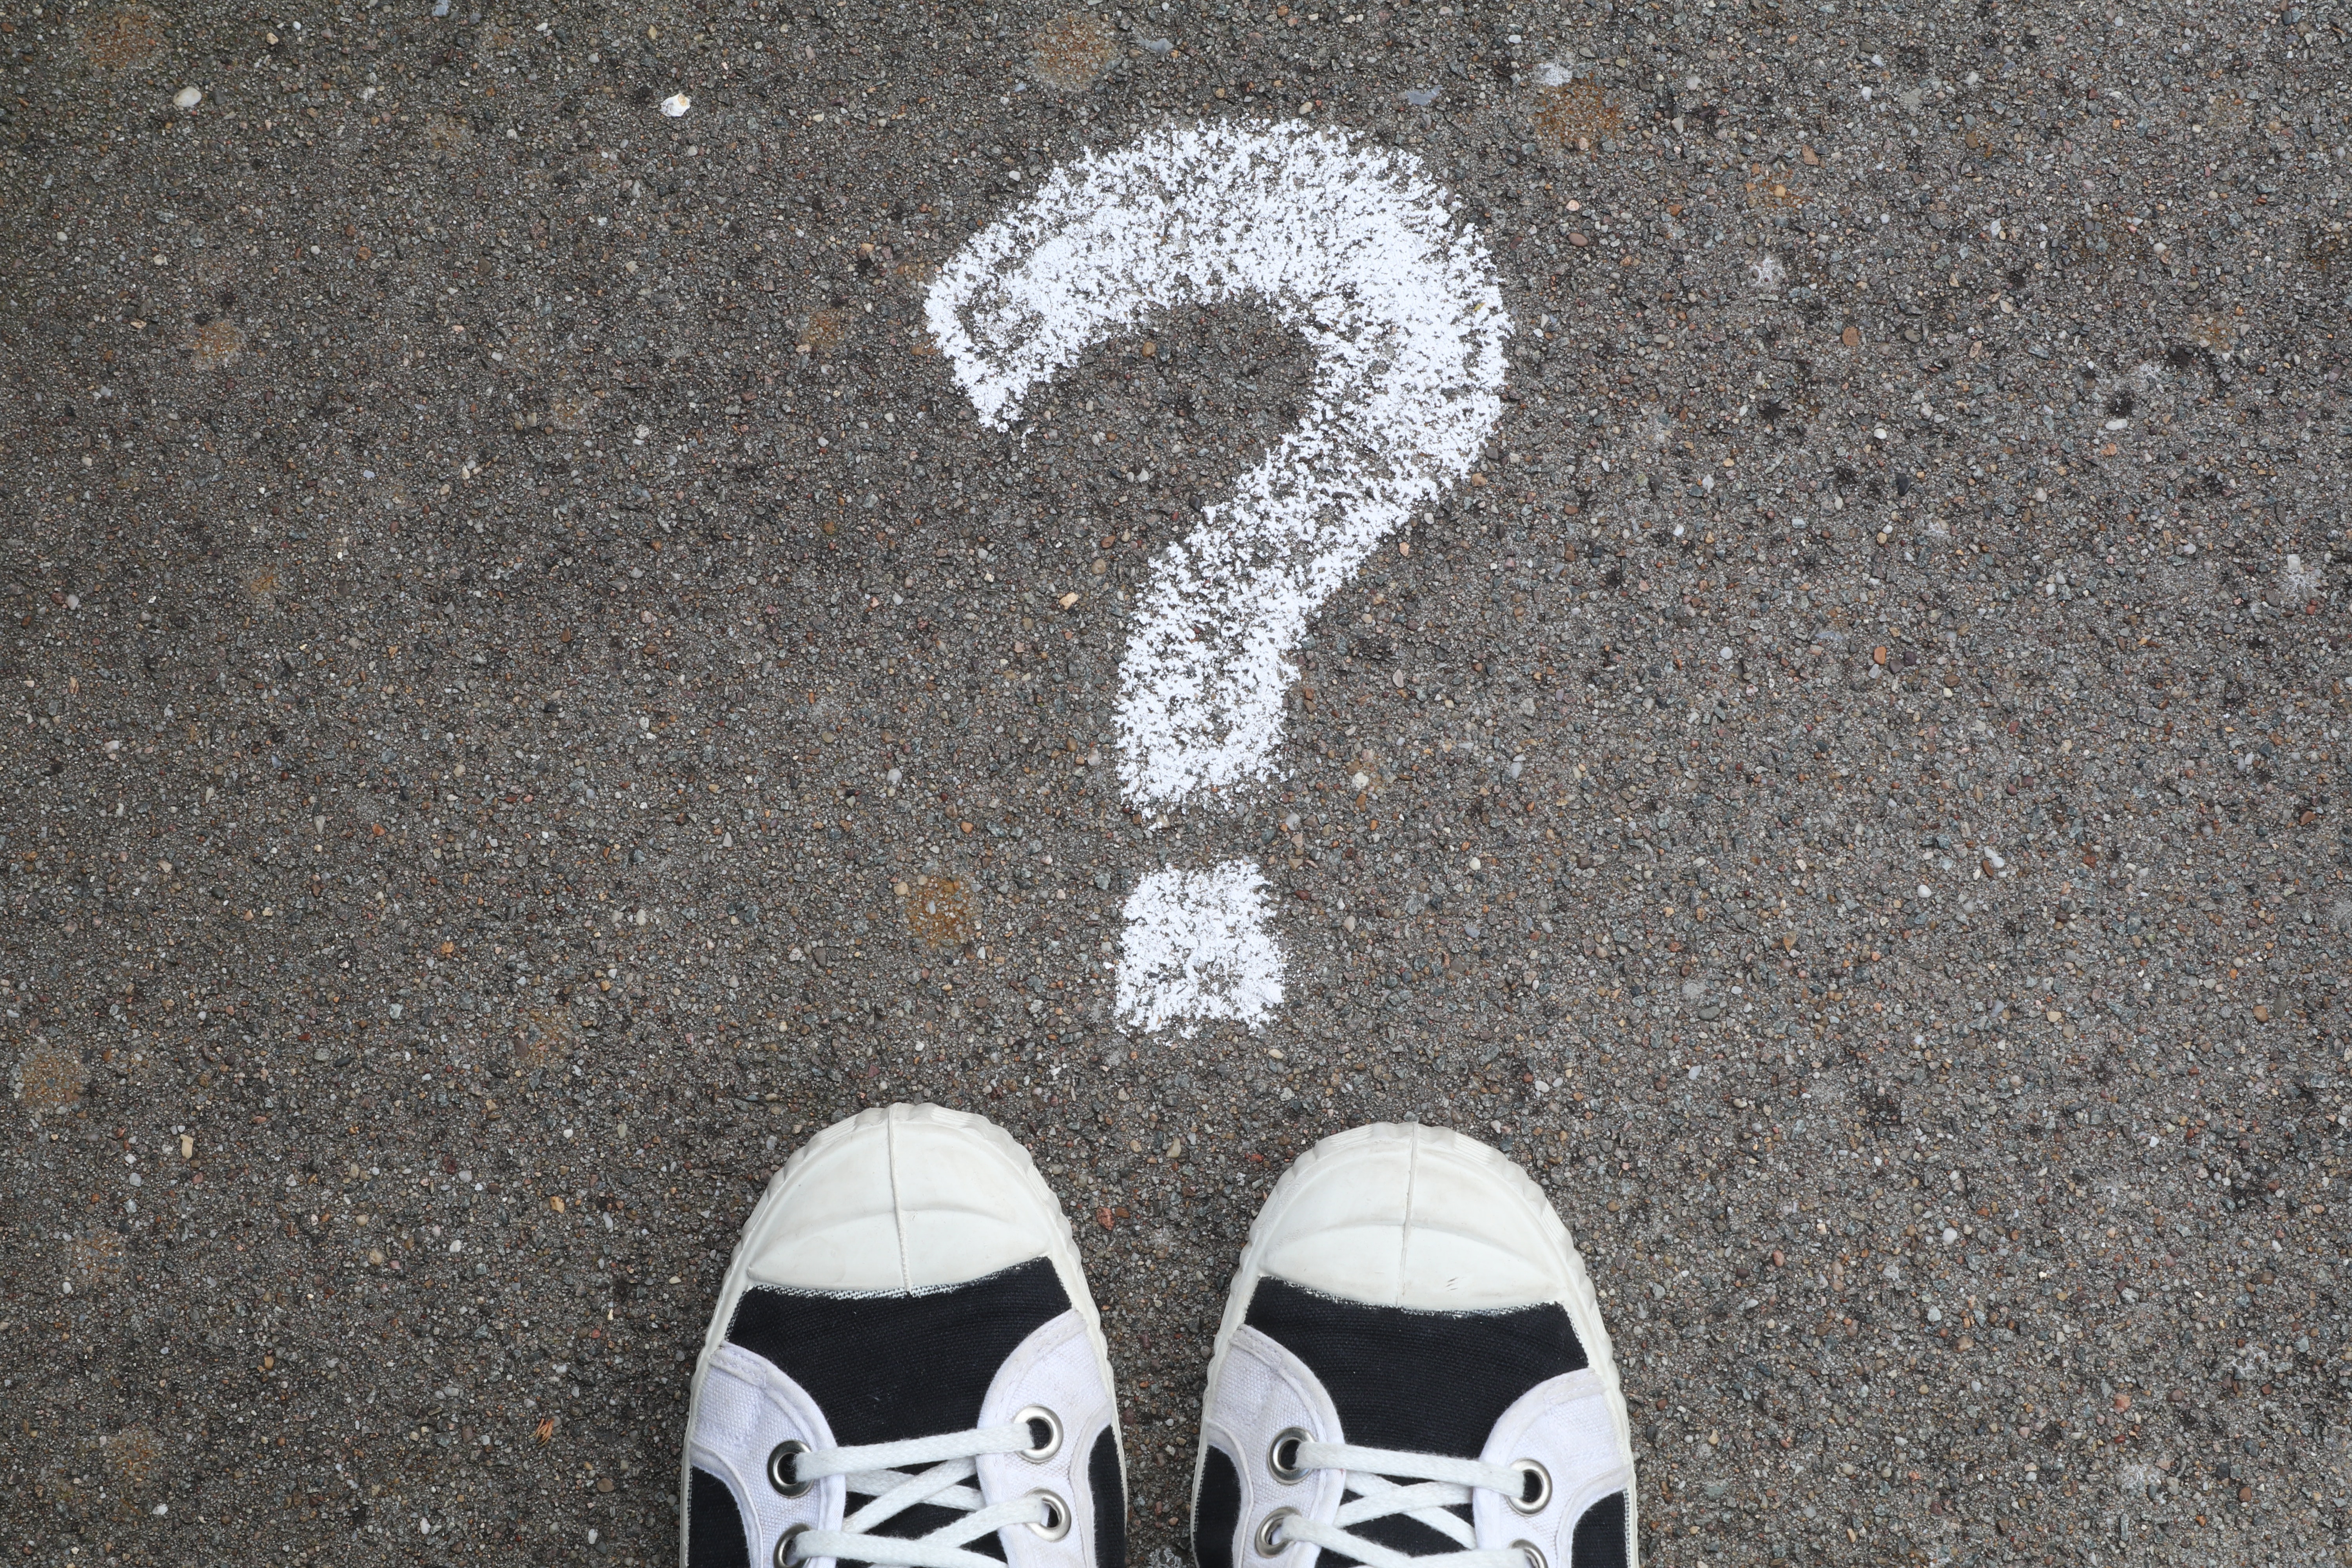 A white chalk question mark on the pavement right above the toes of two sneakers